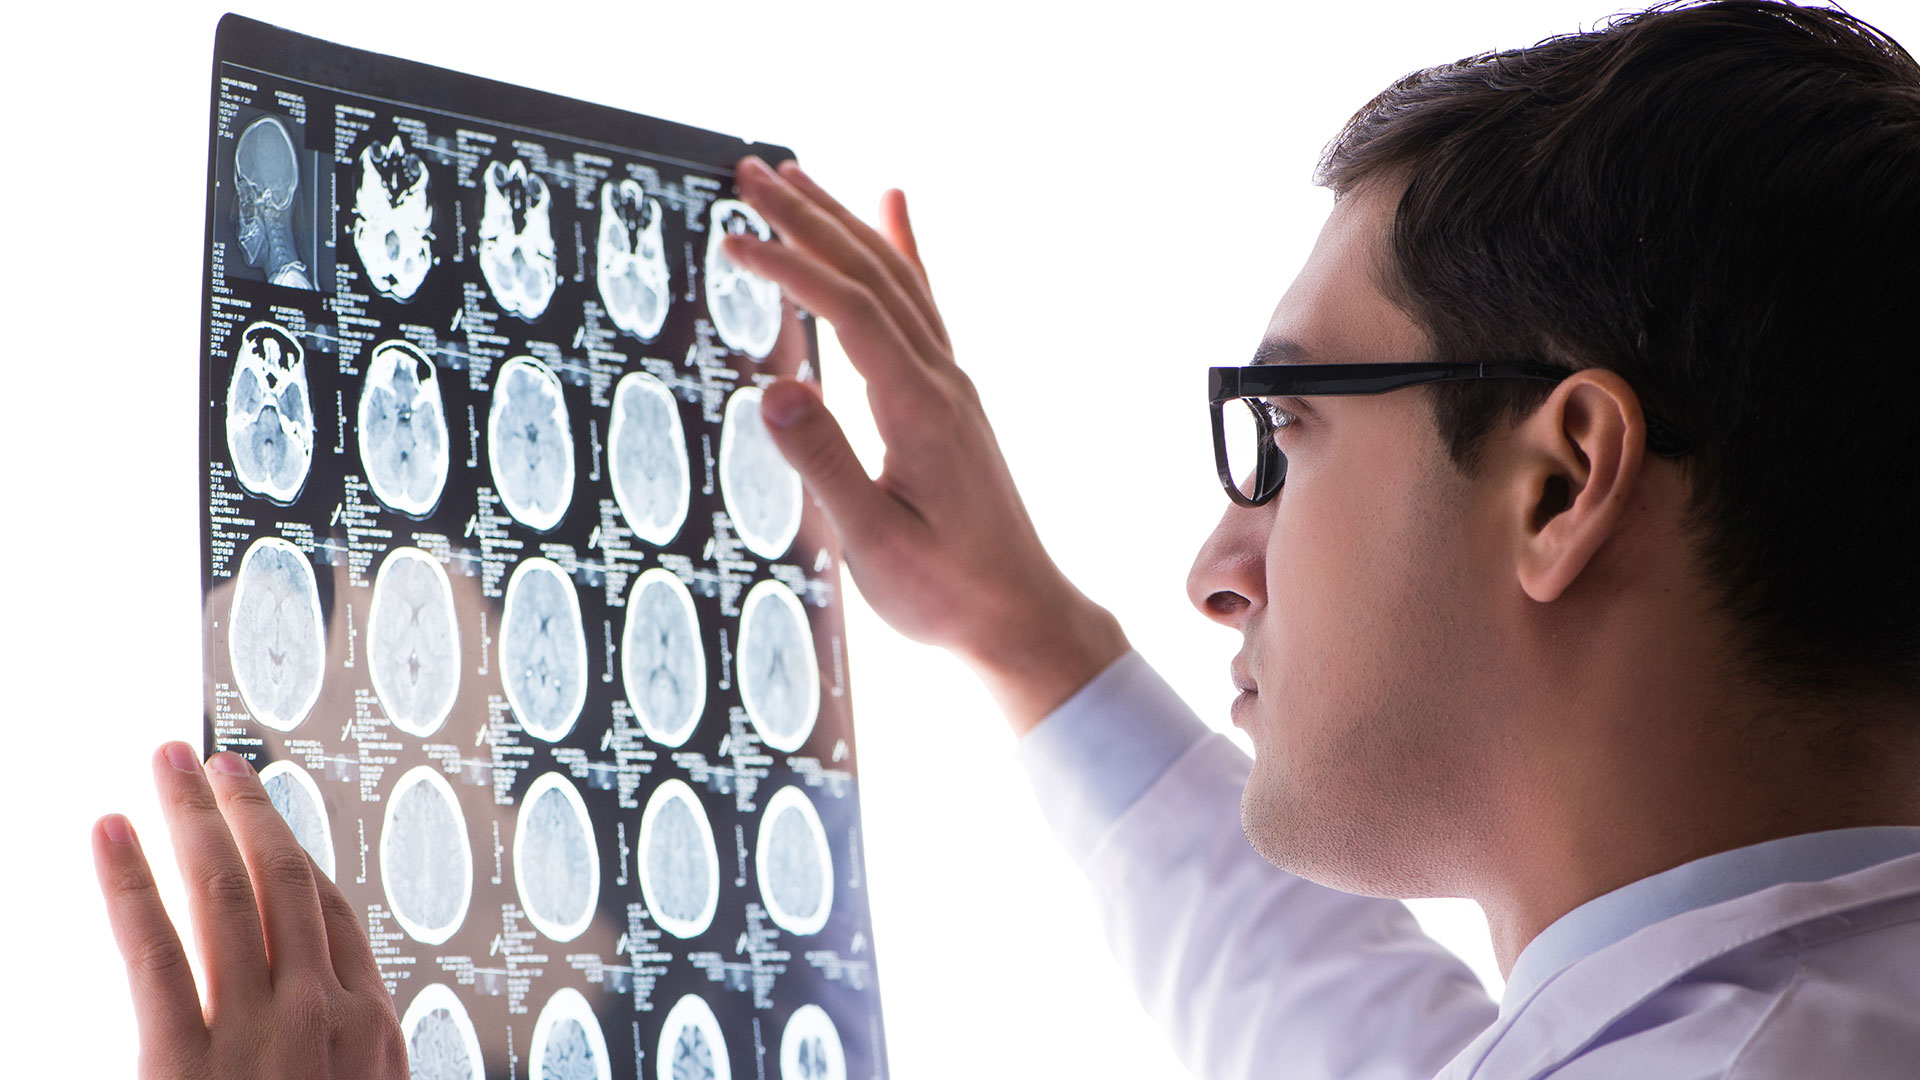 Male doctor looks at brain scan